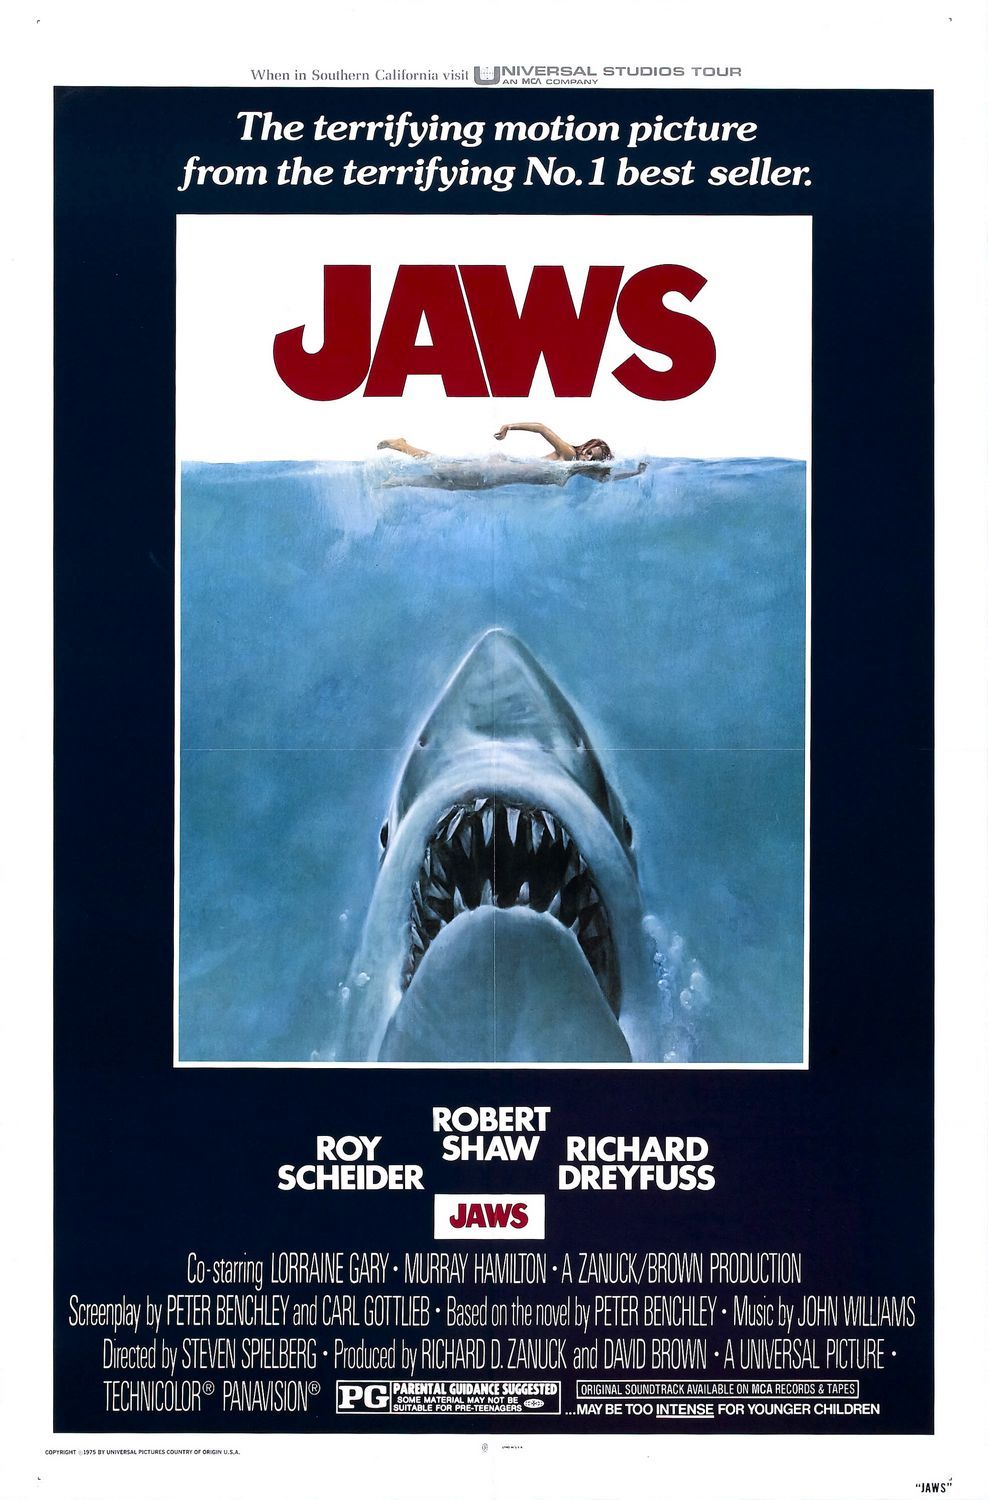 Jaws *Fourth of July Weekend*